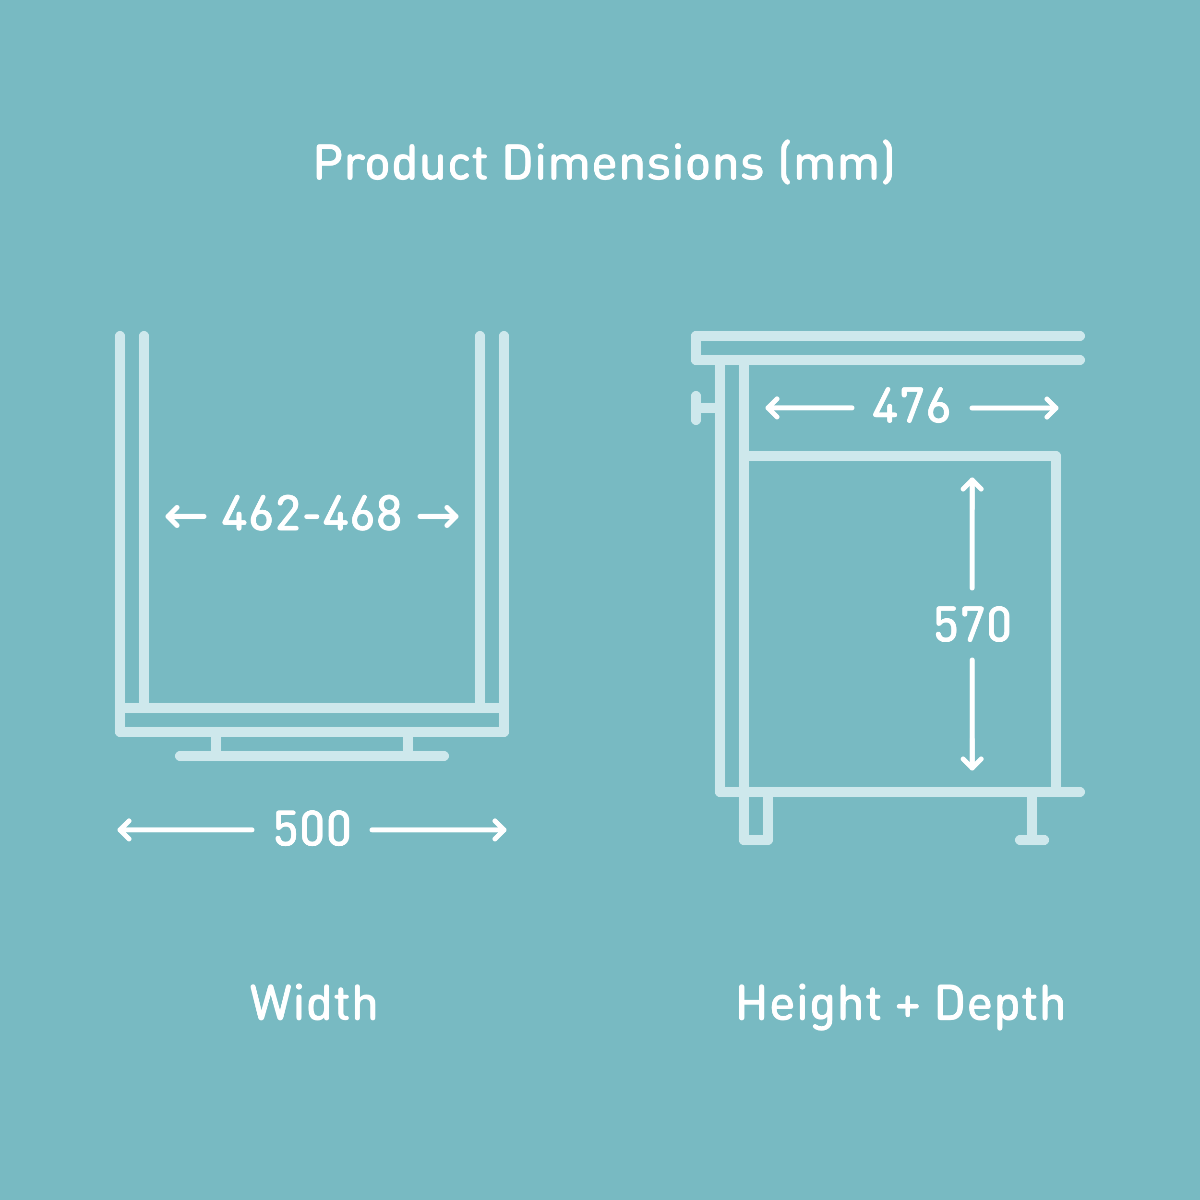 Product dimensions for this well-designed kitchen cabinet bin from Vauth-Sage with two compartments, providing 64 litres of waste and recycling space.